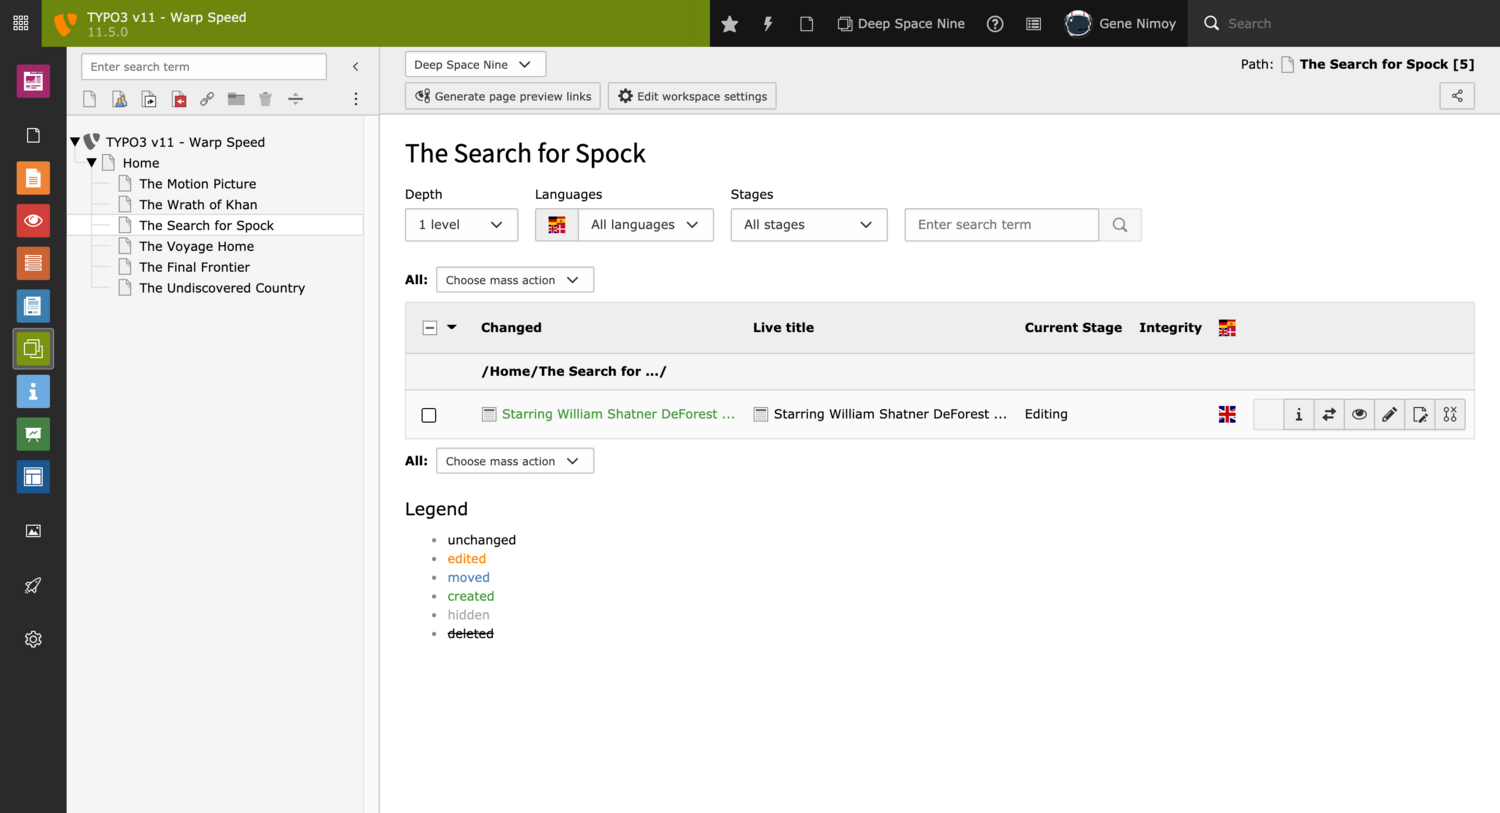 The workspaces module enables editor to collaboratively work on content